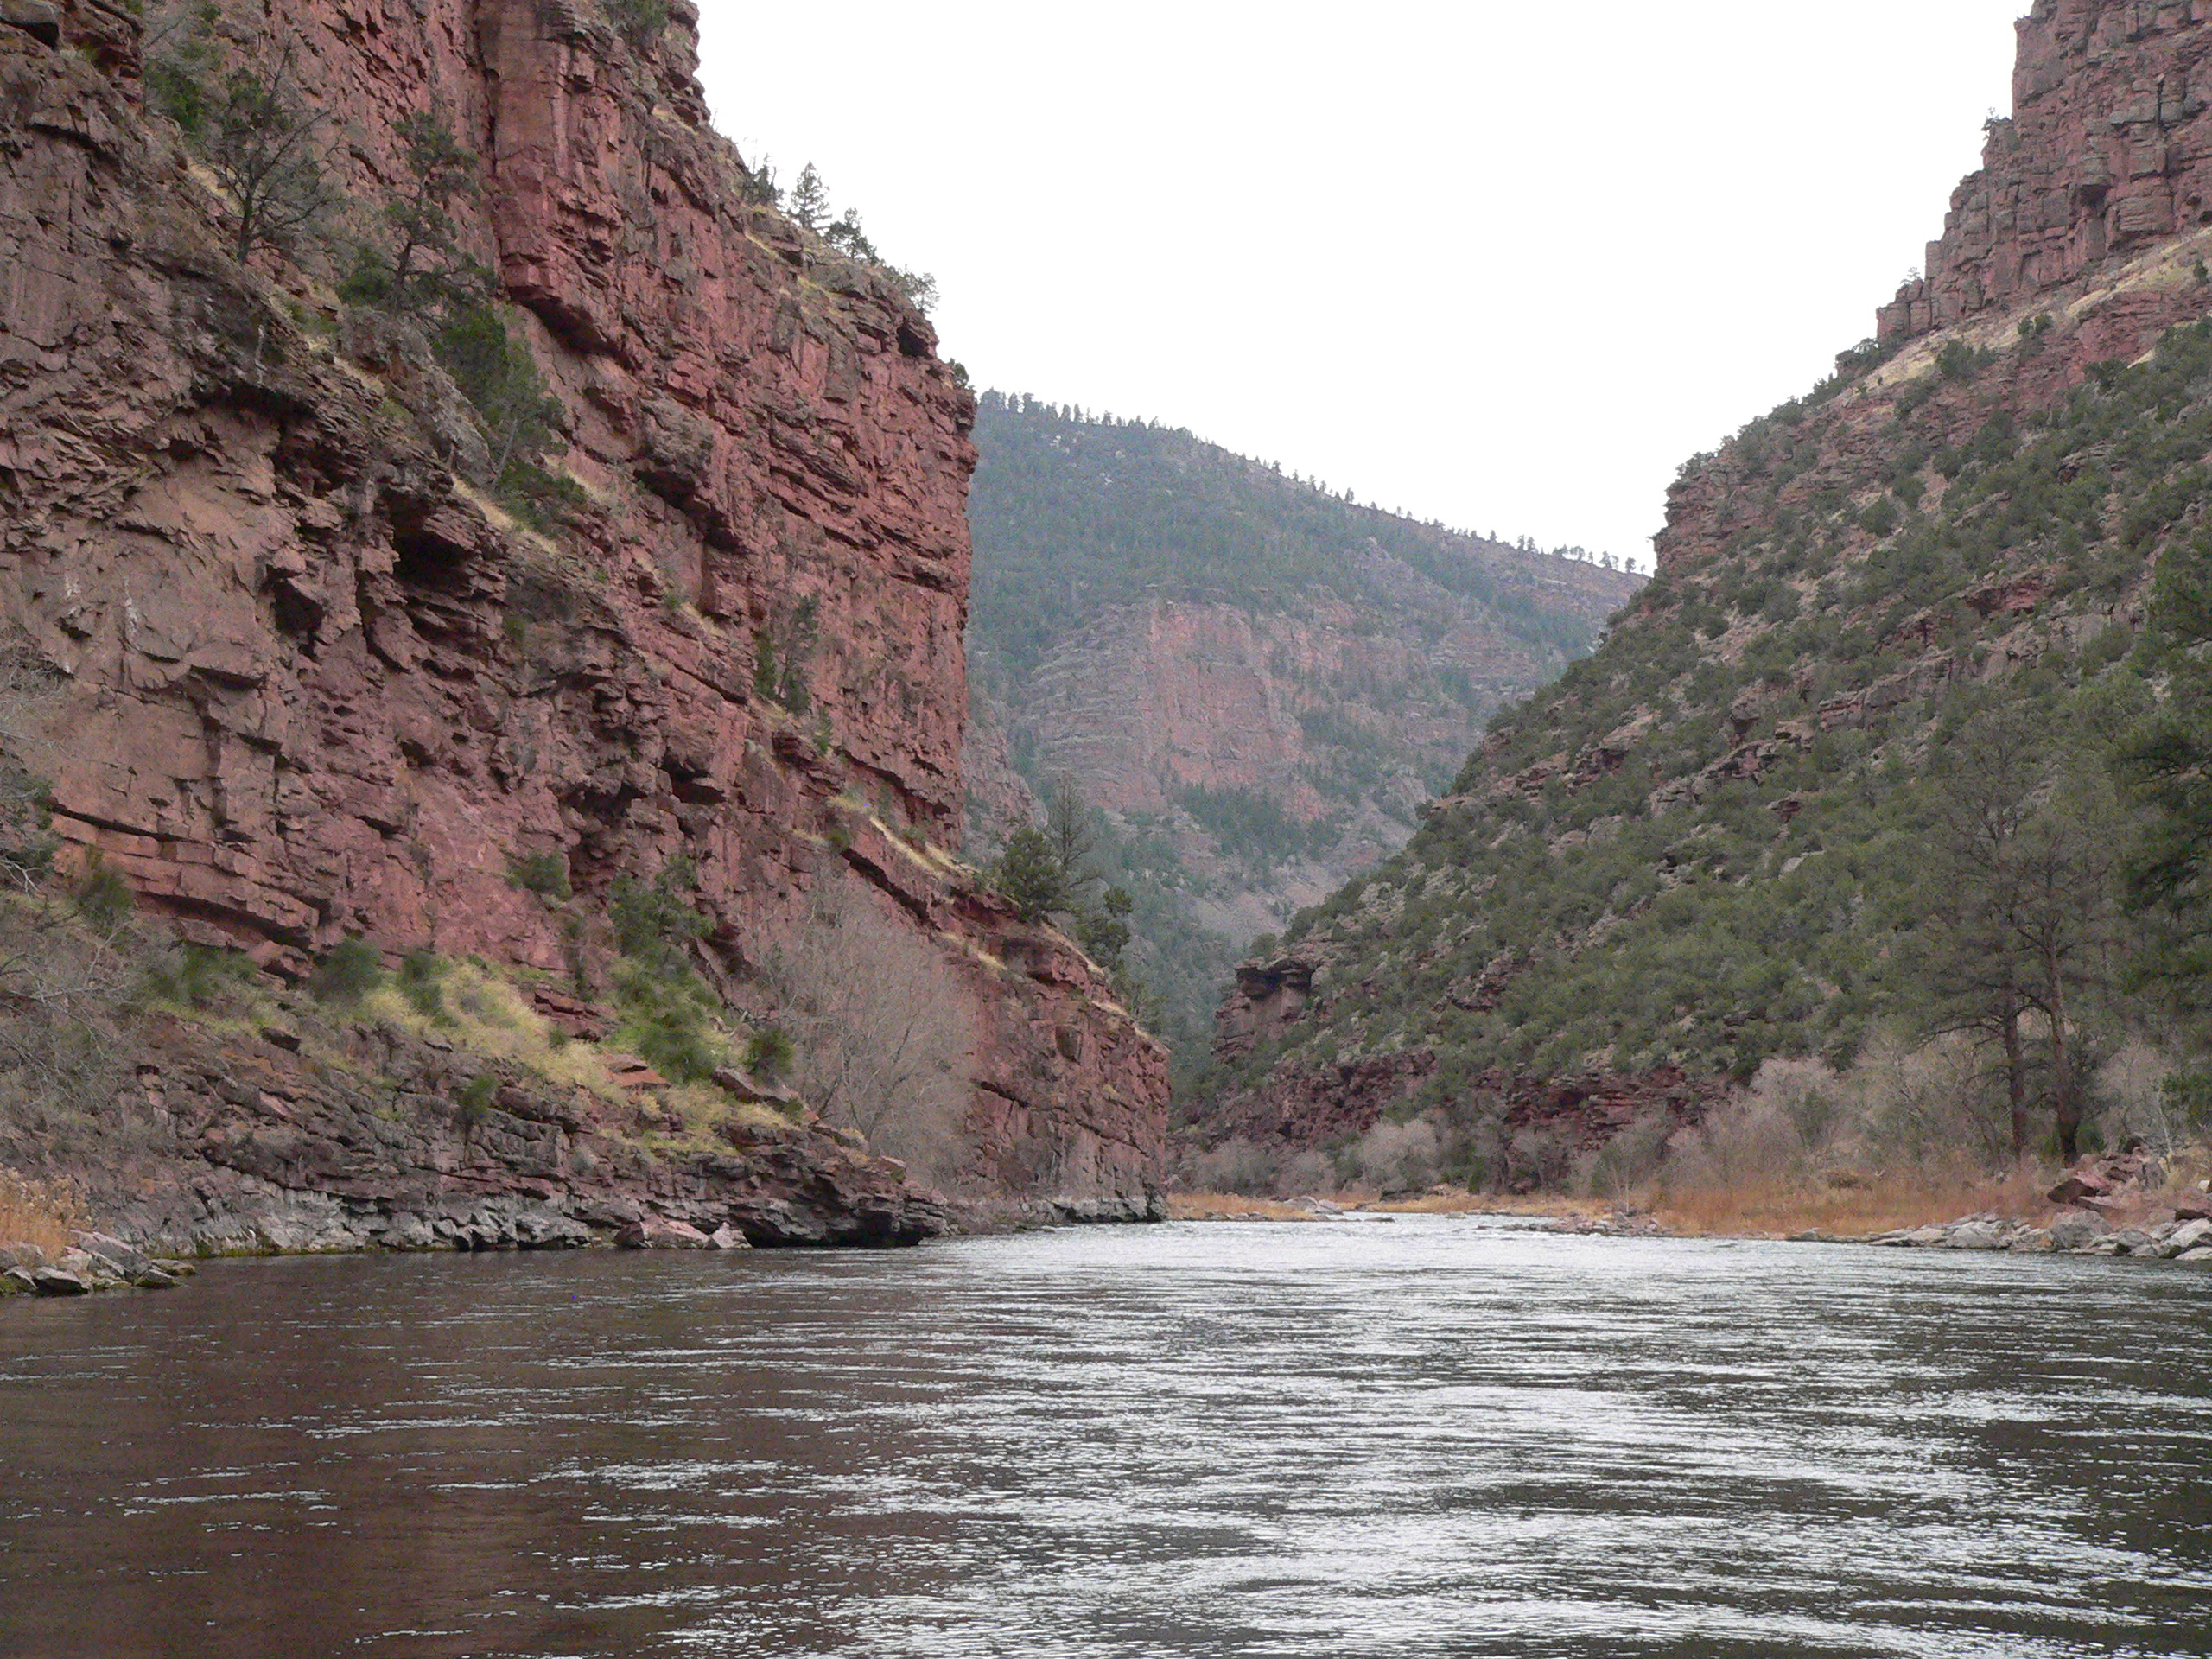 View of Green River in canyon below Flaming Gorge Dam